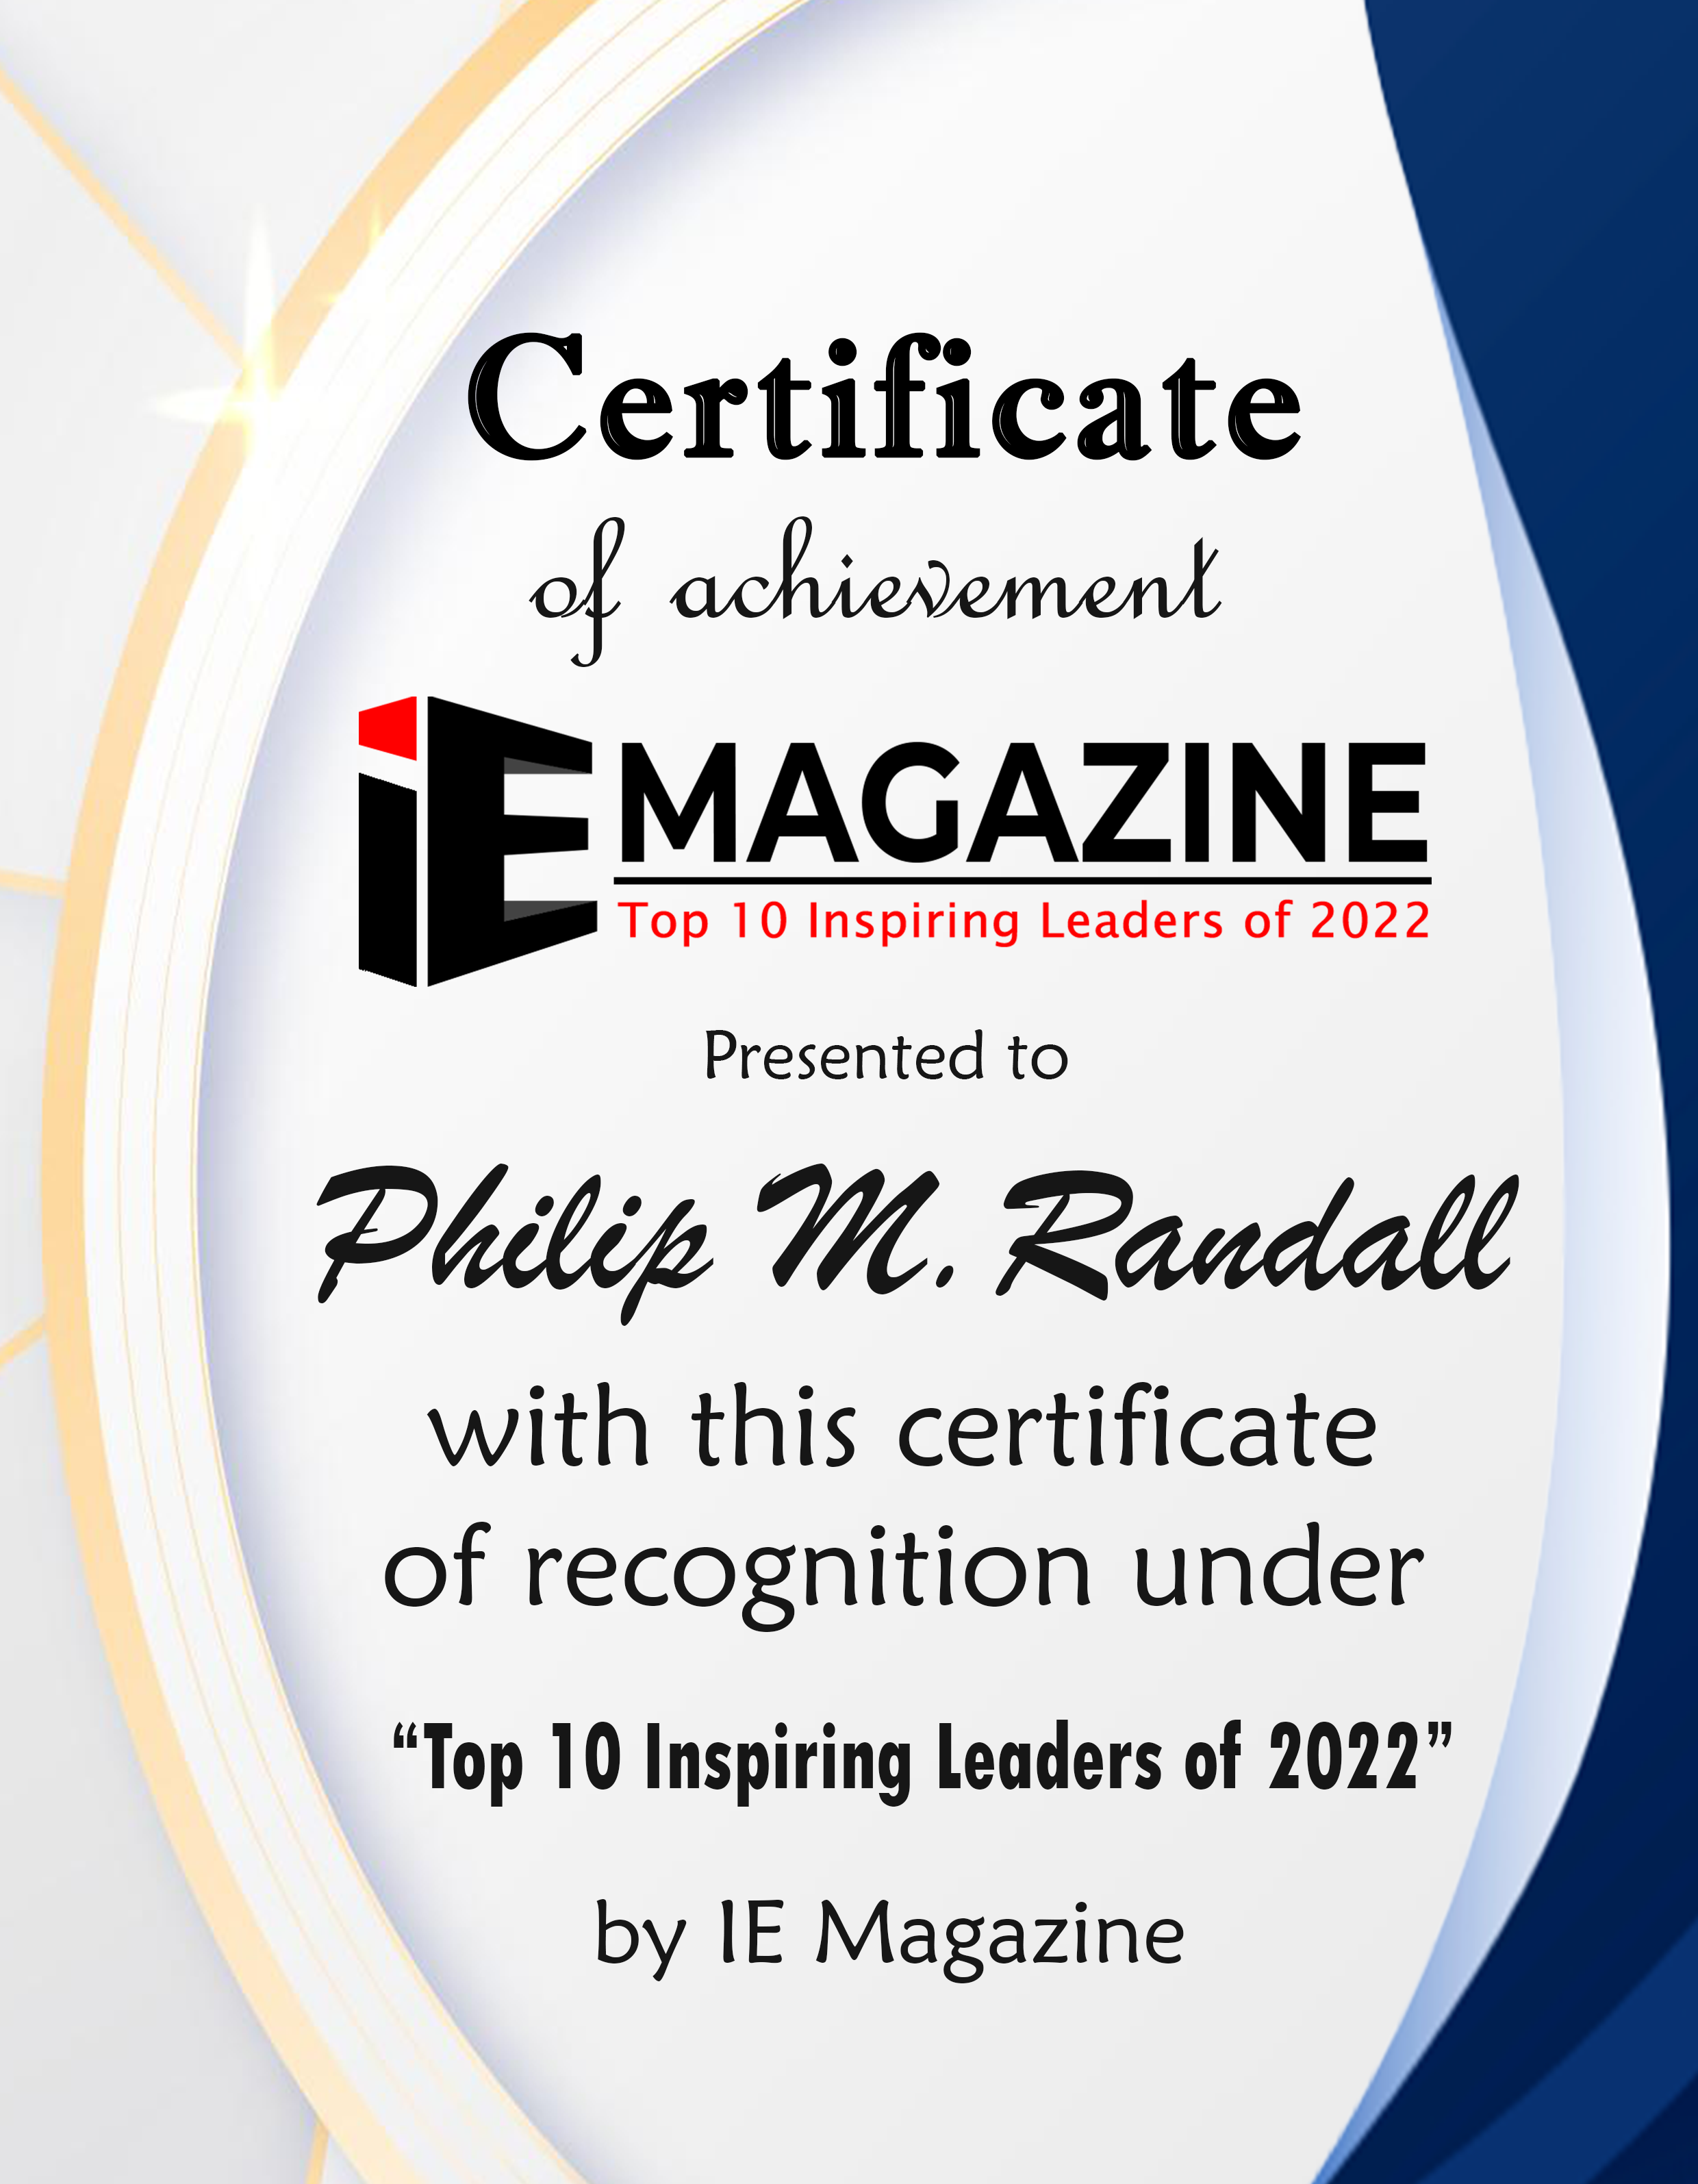 Phillip M Randall,Ph.D., CPG, Managing Partner at The Thorndyke Group Certificate